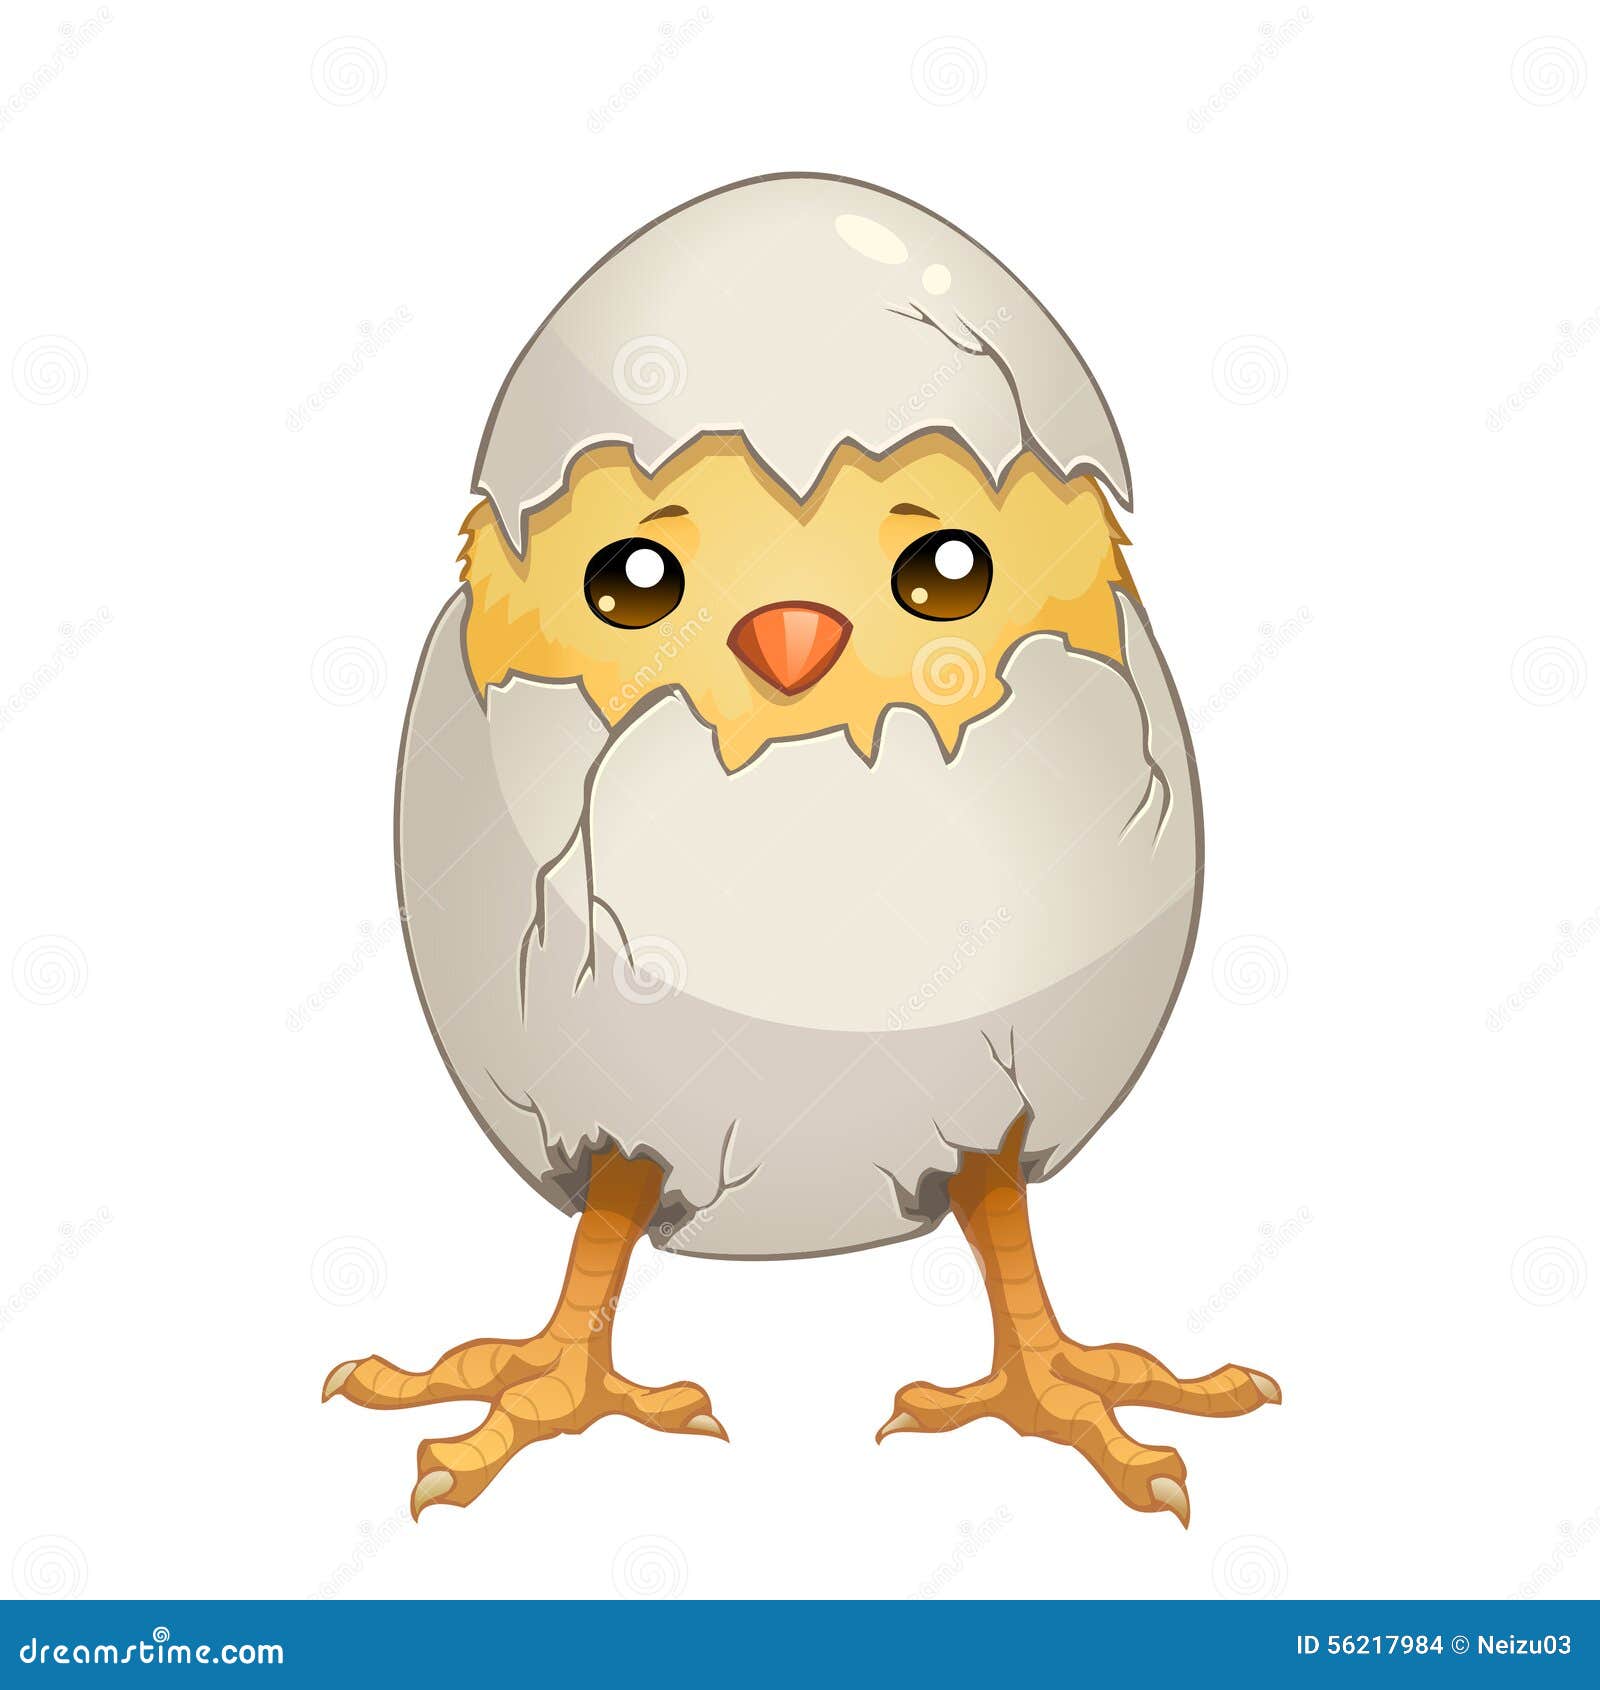 Chicken in a cracked egg stock illustration. Illustration of young -  56217984